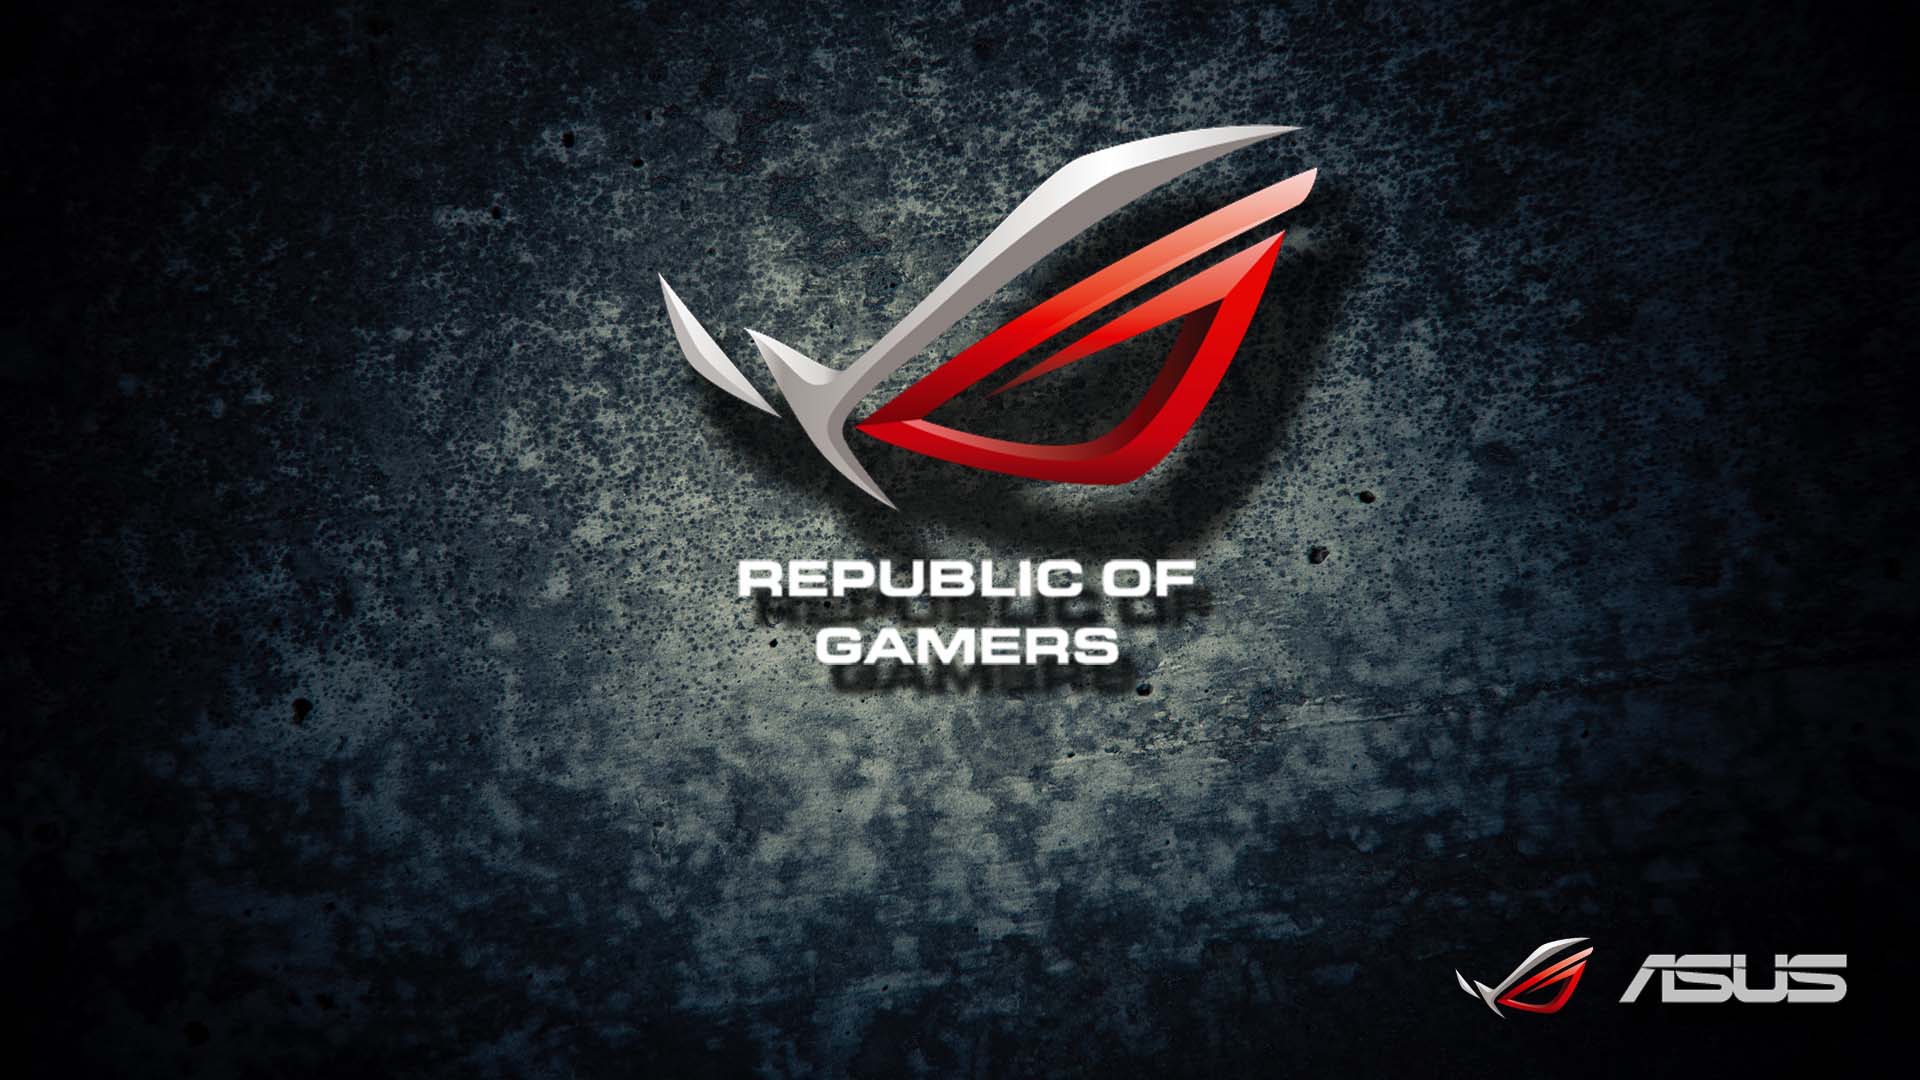 Wallpaper Competition: Vote For Your Favorite - Republic of Gamers ...